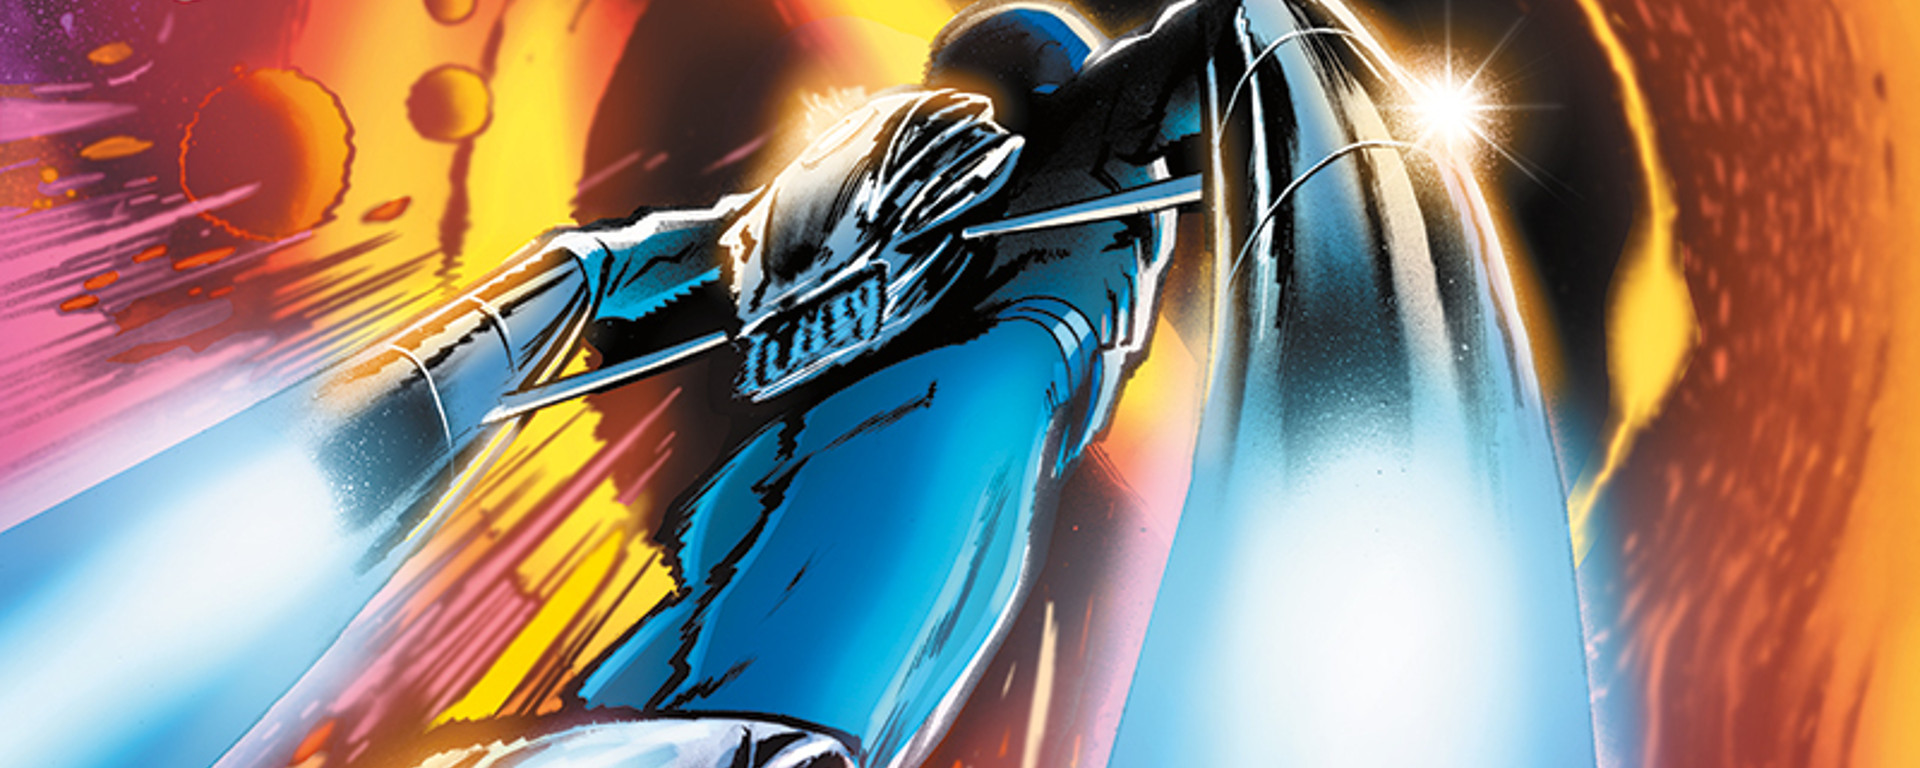 The Blue Flame #1 Header